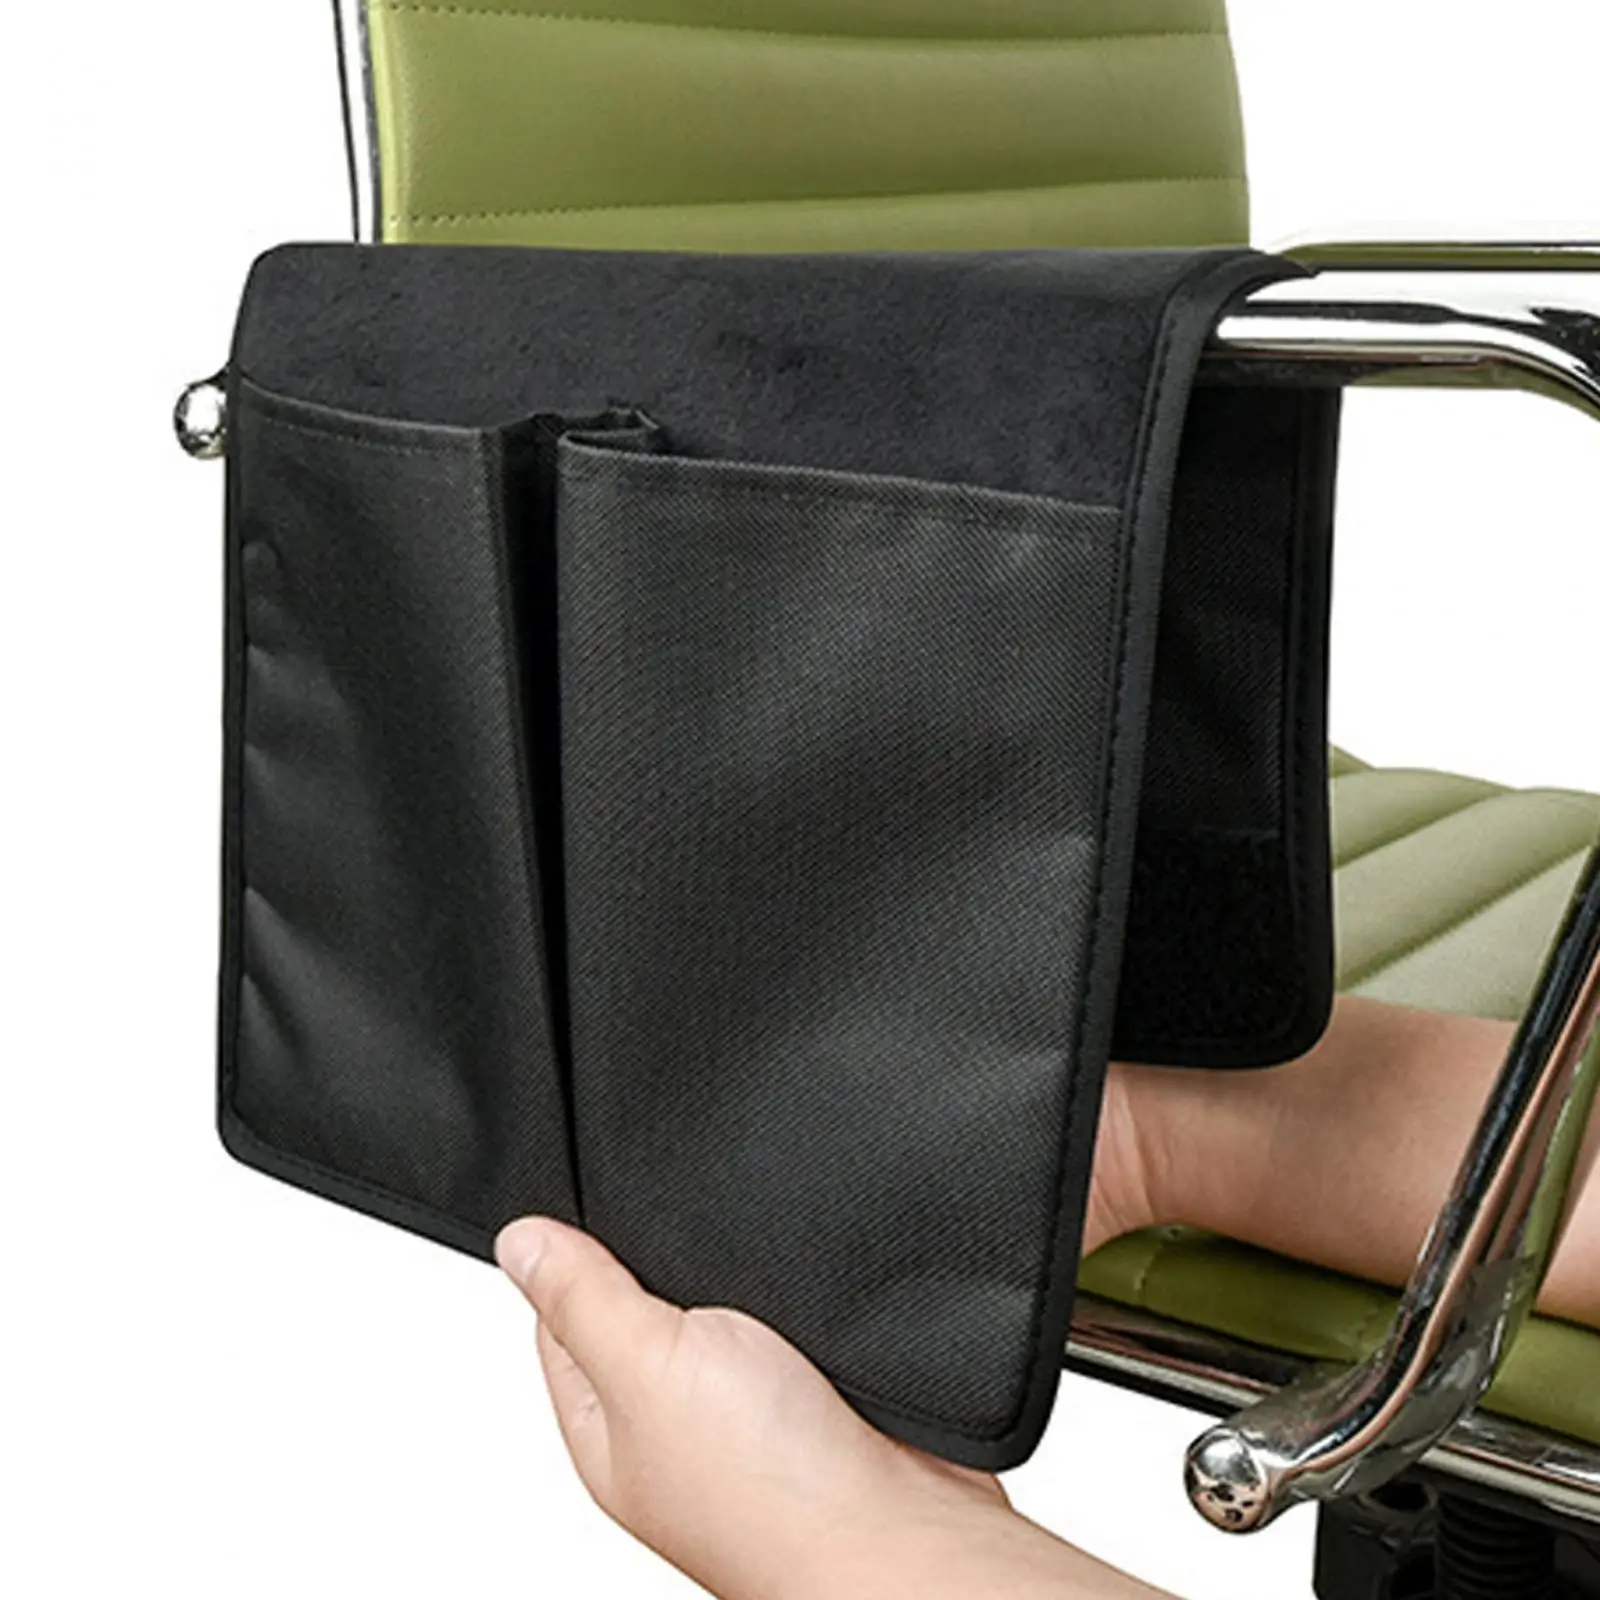 Chair Side Storage Organizer Bedside Storage Bag Accessories Bag Portable Wheelchair Armrest Pouch for Glasses Remotes Phone Pen